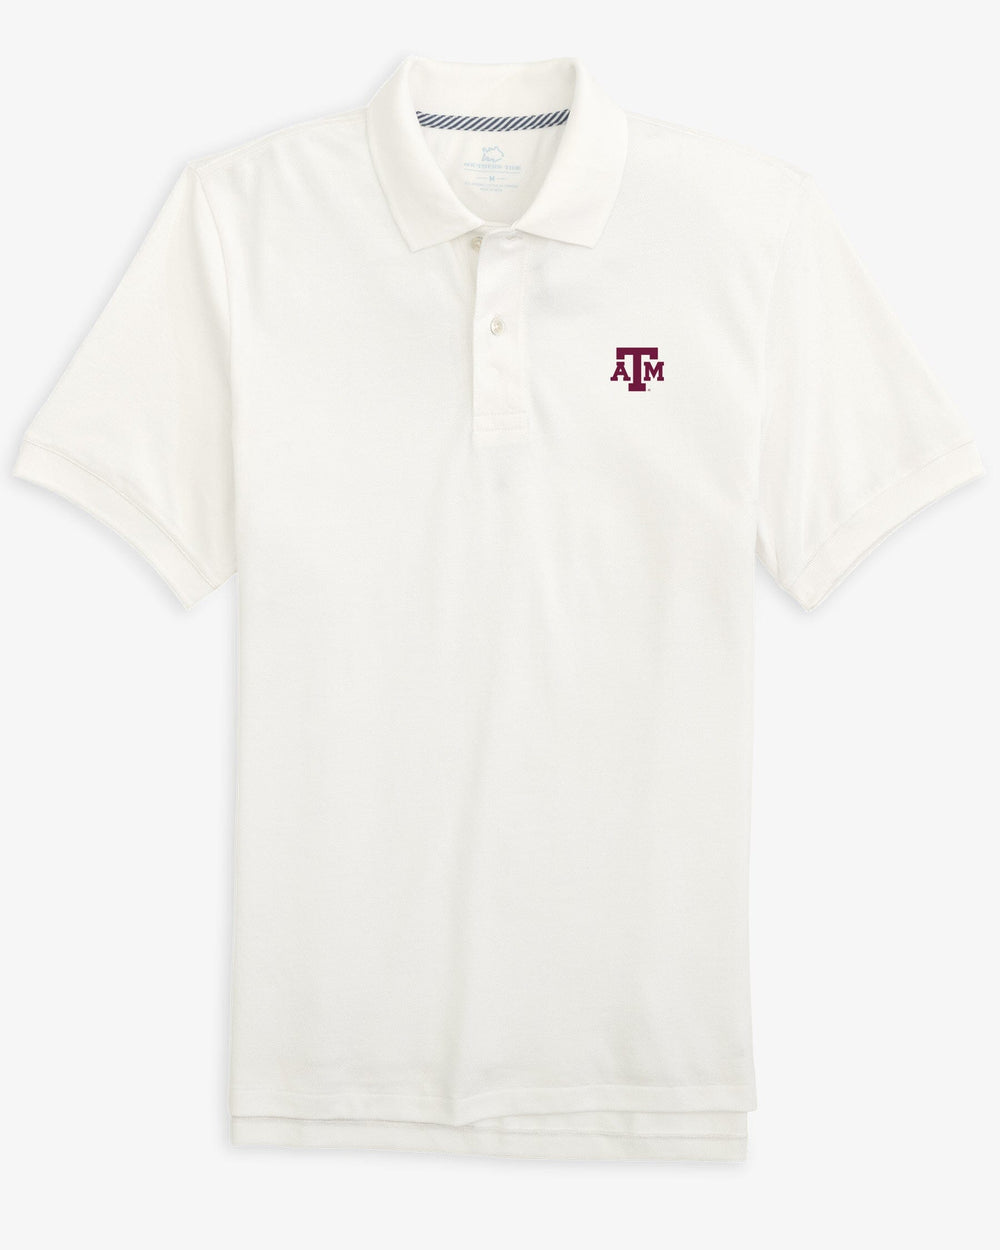 The front view of the Texas A&M Aggies Skipjack Polo by Southern Tide - Classic White